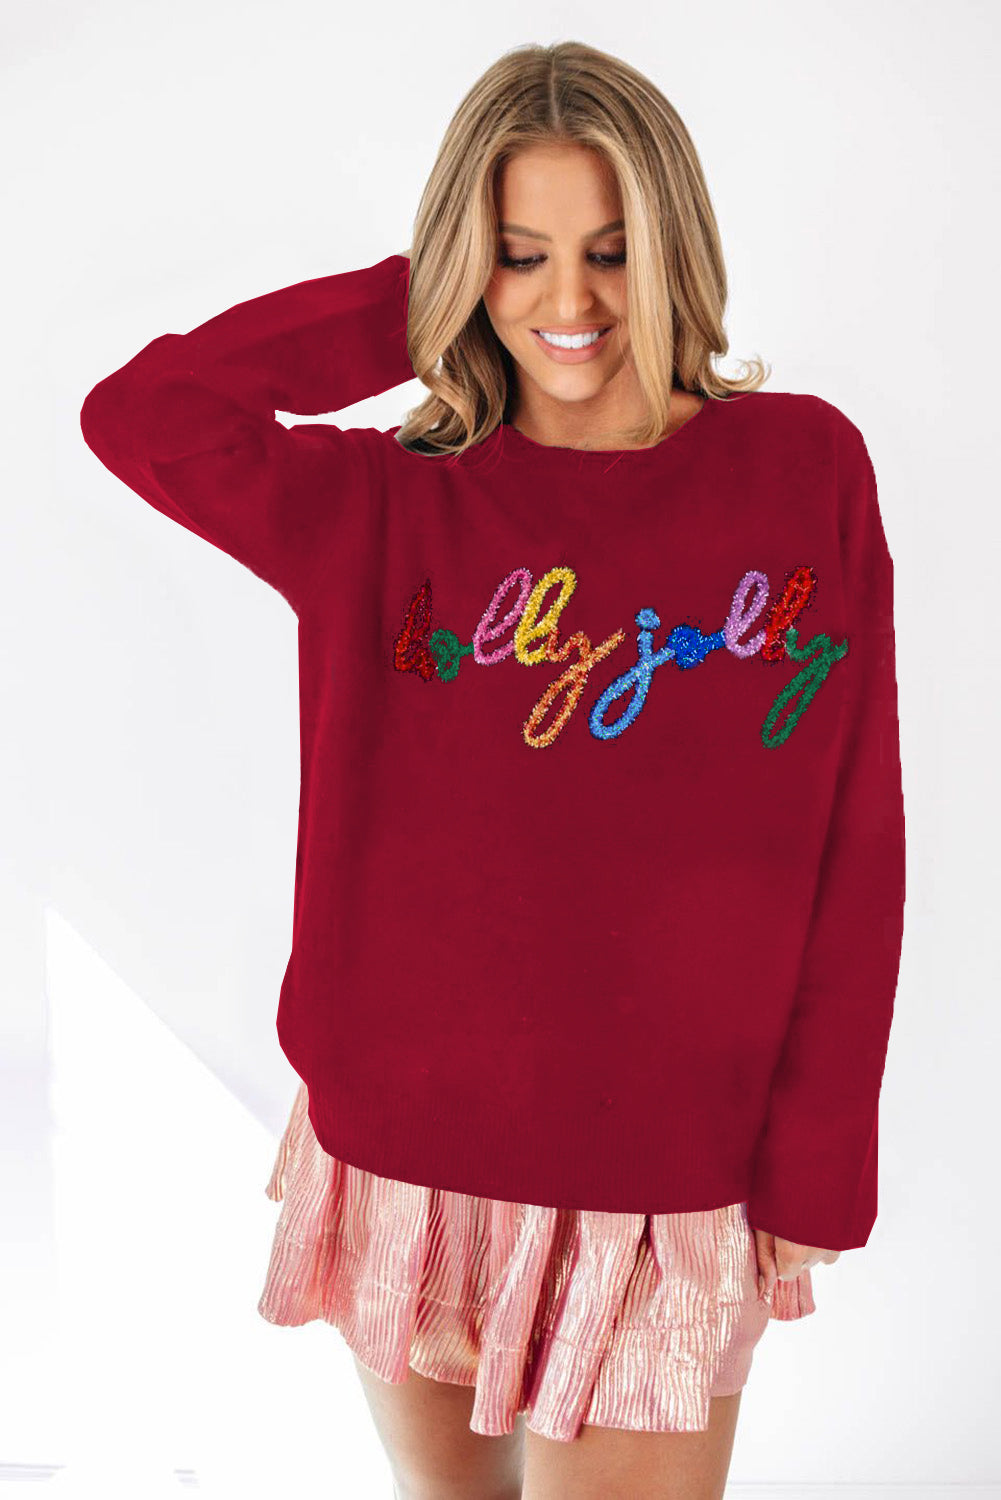 White Holly Jolly Round Neck Casual Sweater